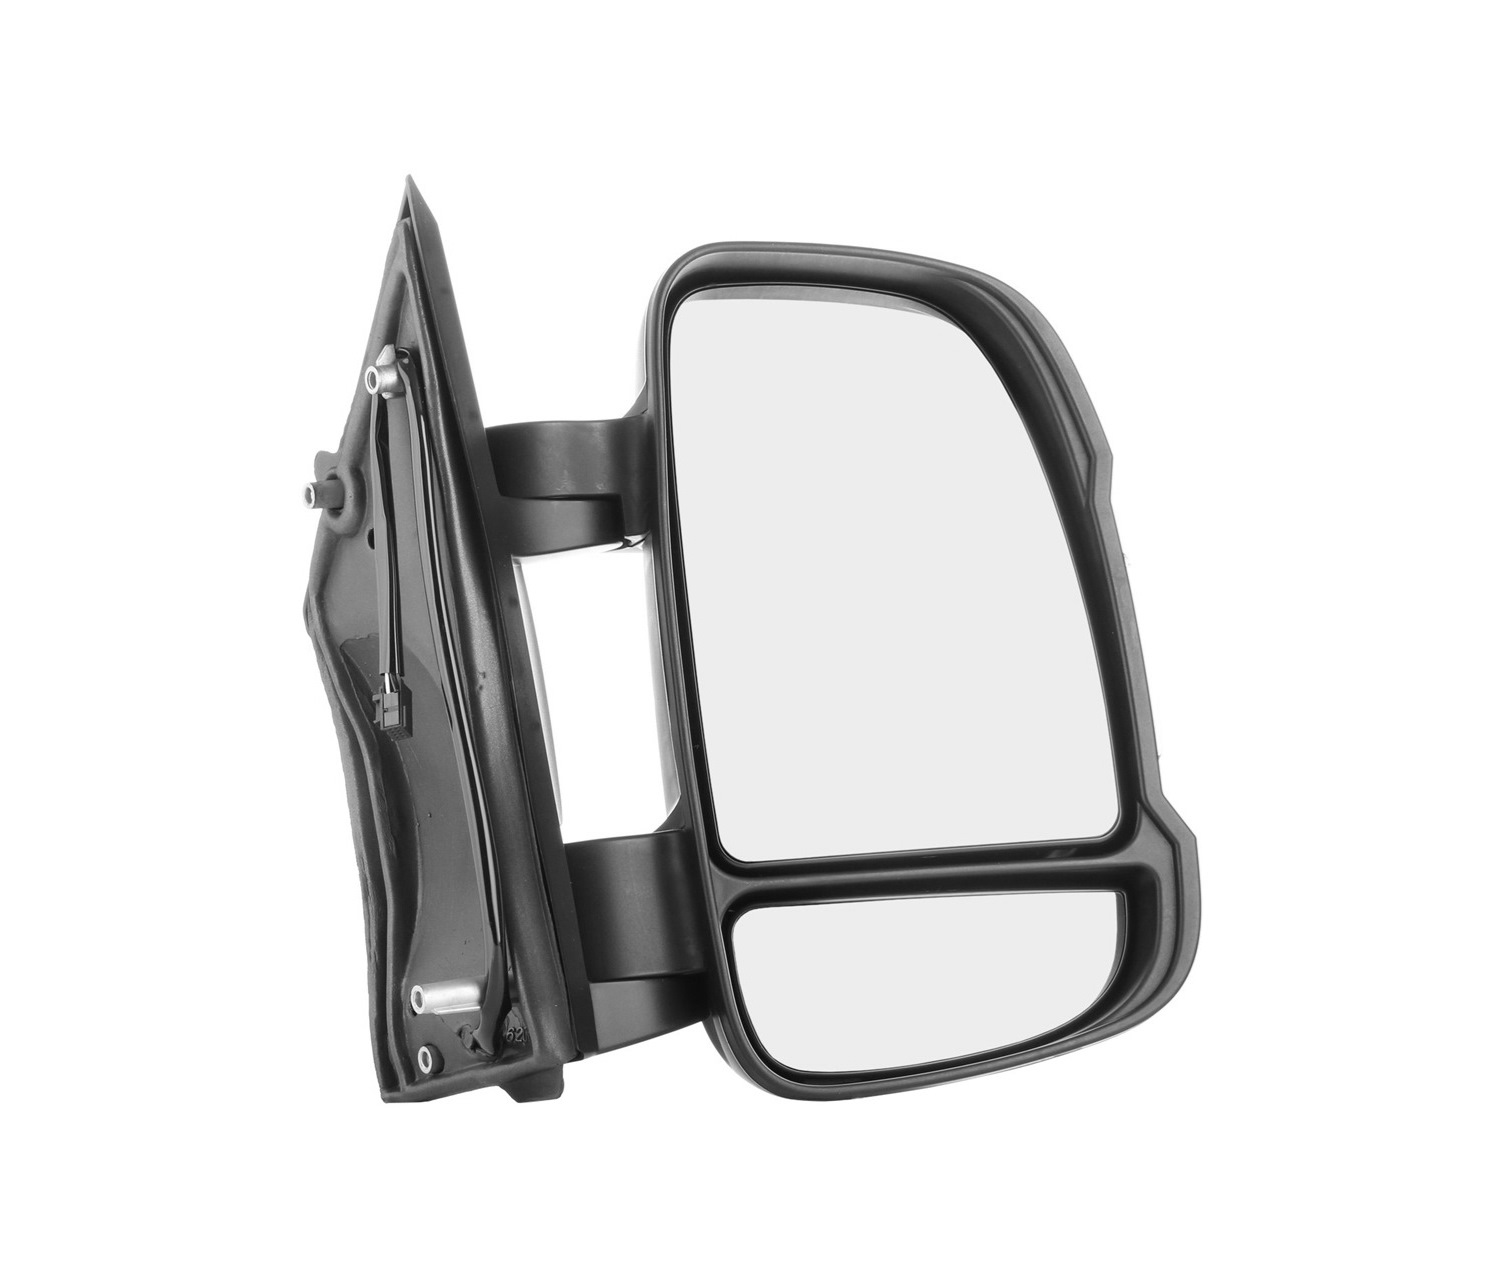 VAN WEZEL 1651808 Wing mirror Right, black, Complete Mirror, Convex, for electric mirror adjustment, Heatable, with wide angle mirror, Short mirror arm